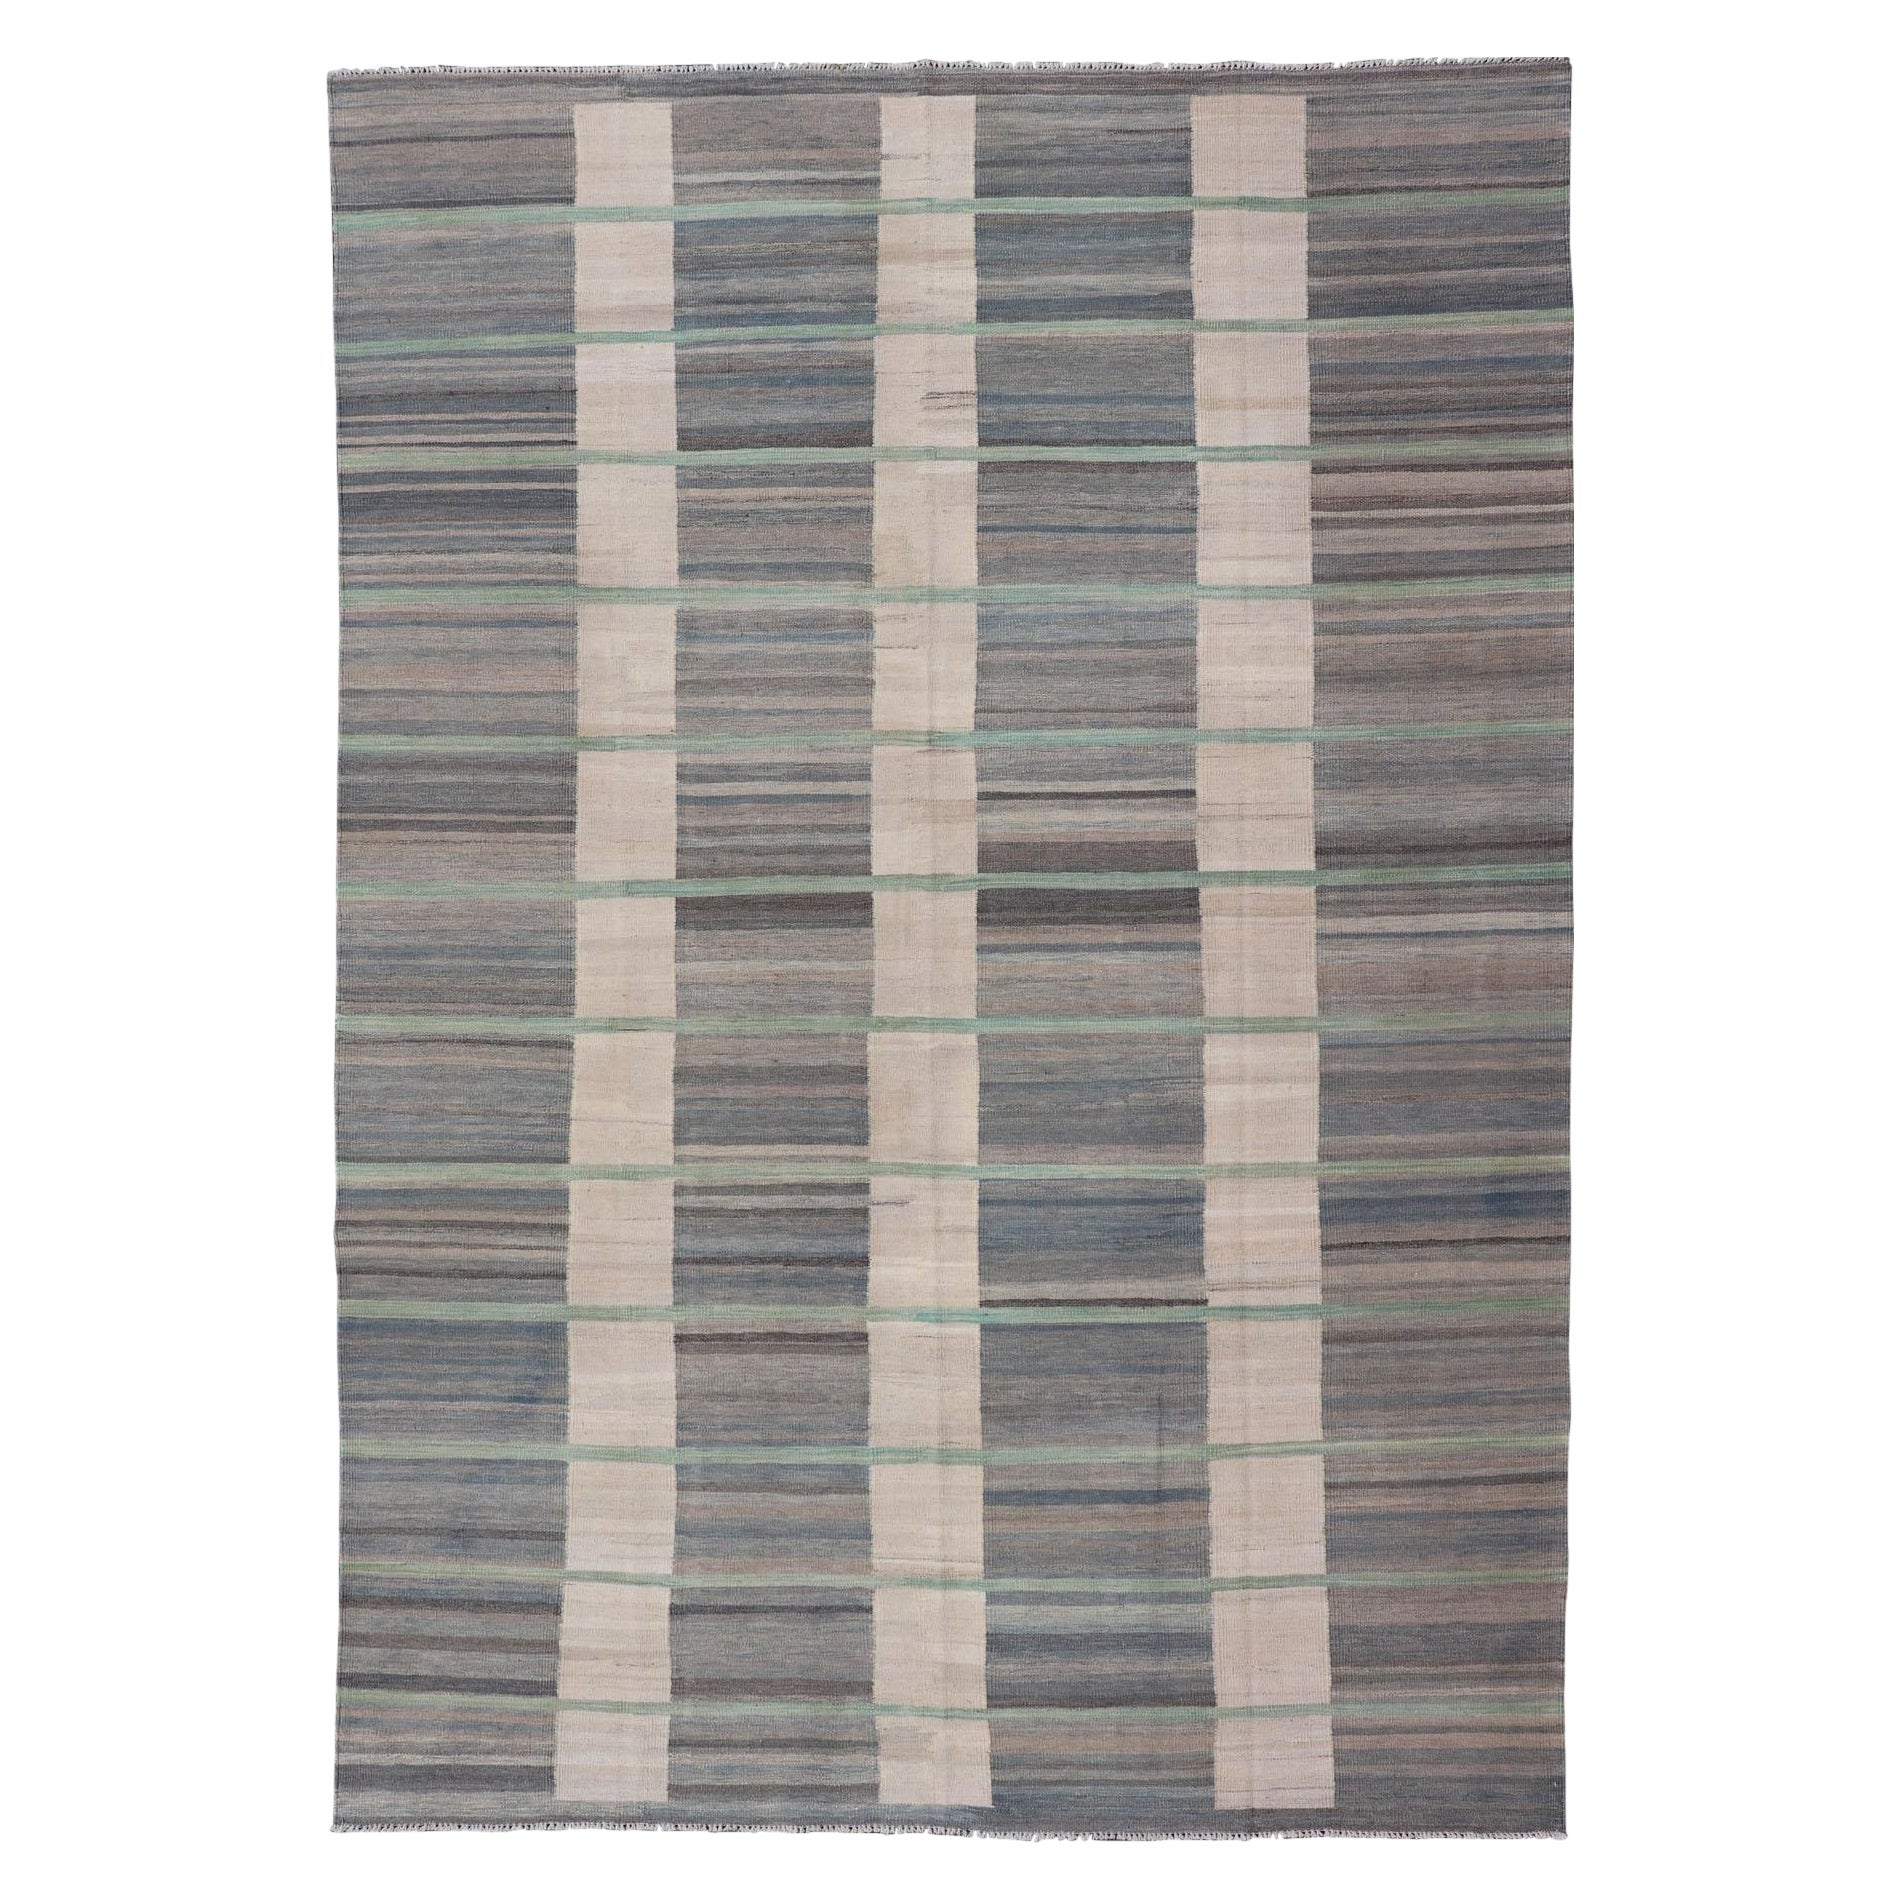  Flat-Weave Modern Kilim Rug in shades of Gray, Brown, Cream, Blue and Green For Sale